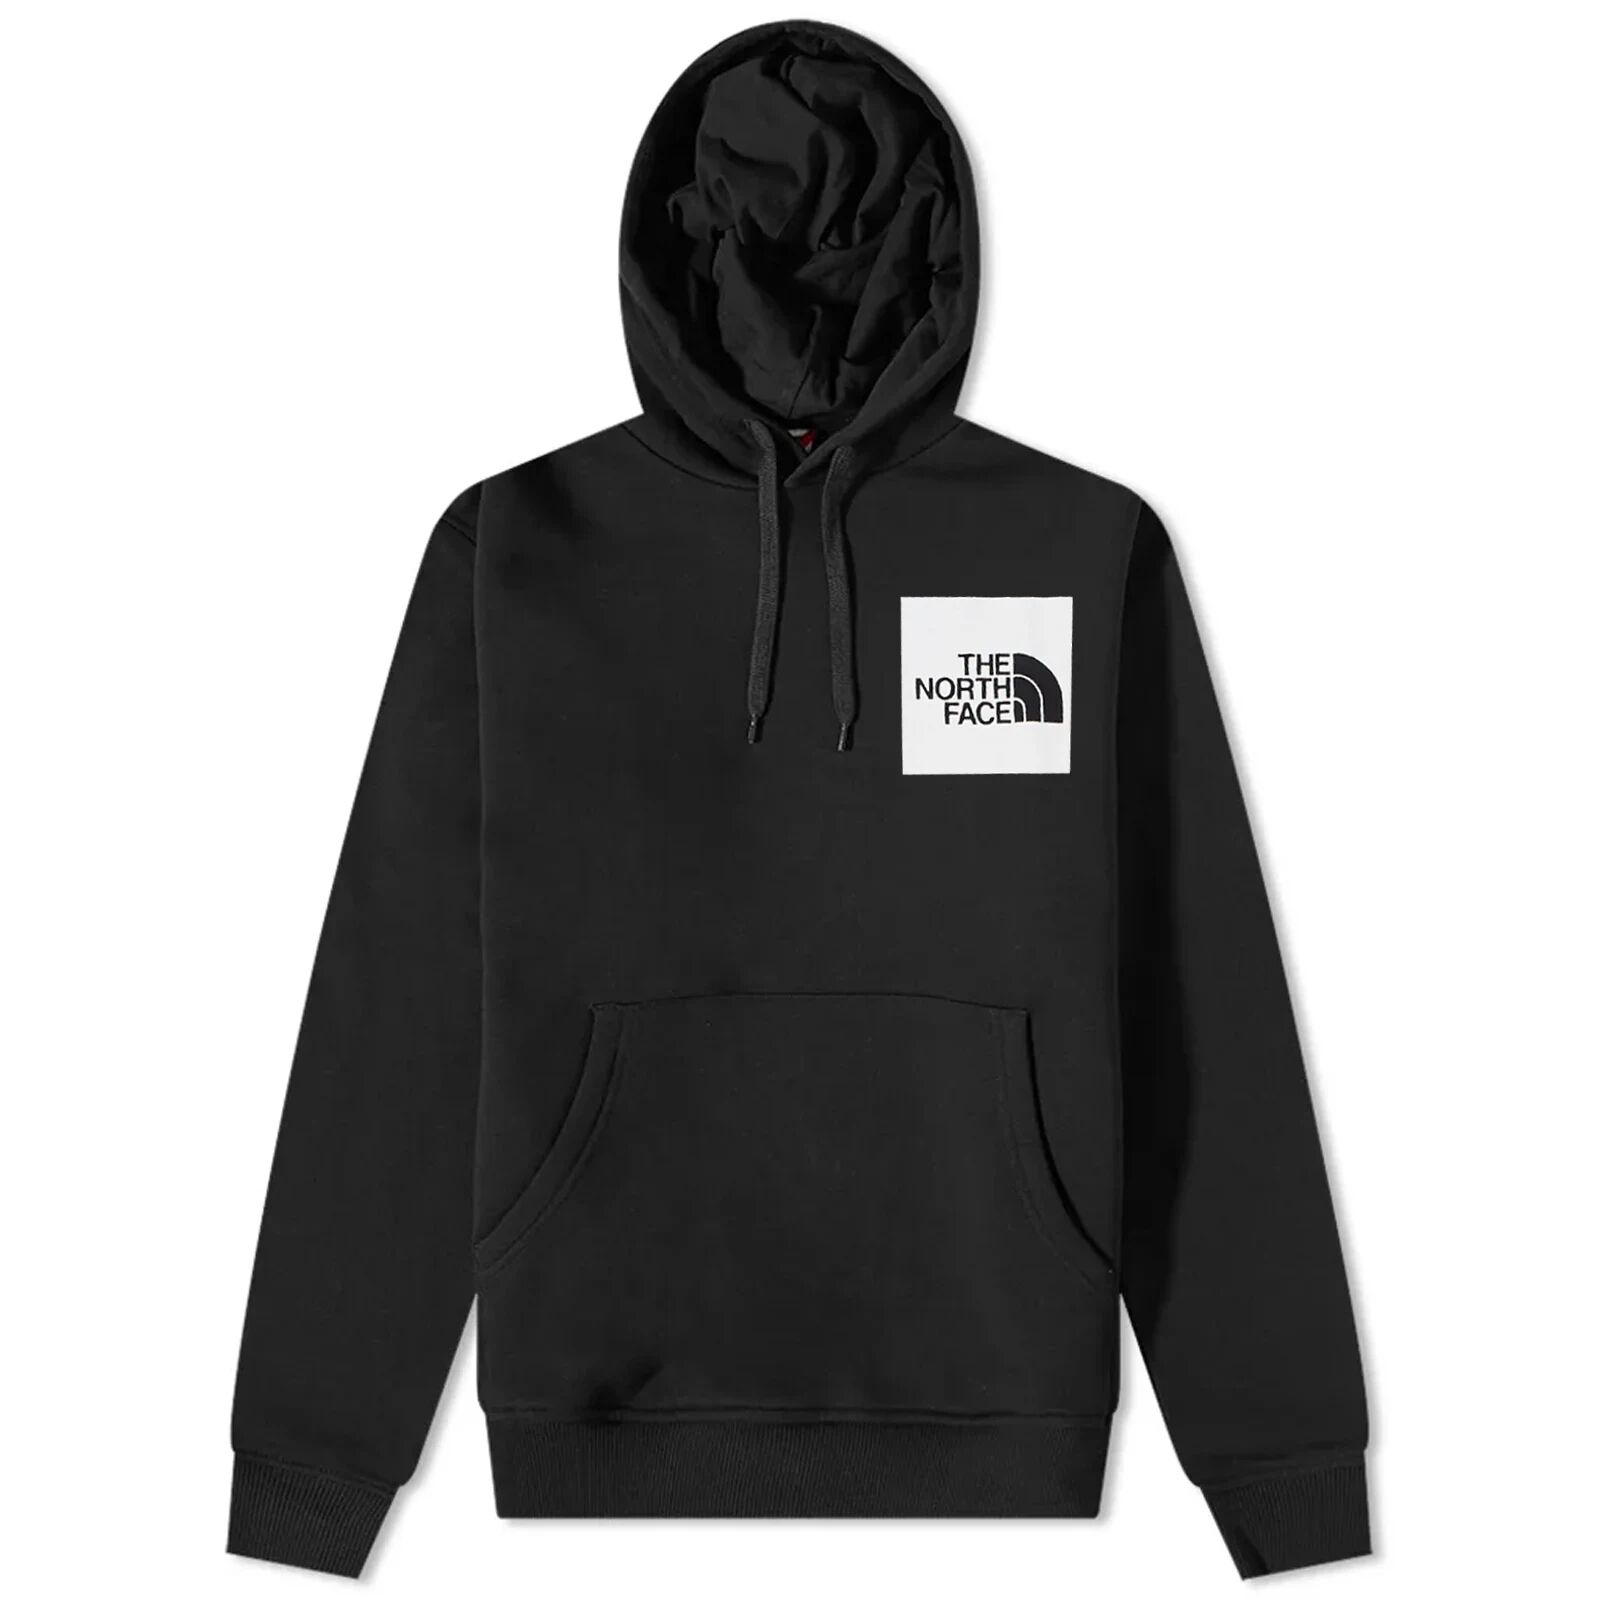 The North Face Men's Fine Popover Hoodie in Black, Size Large